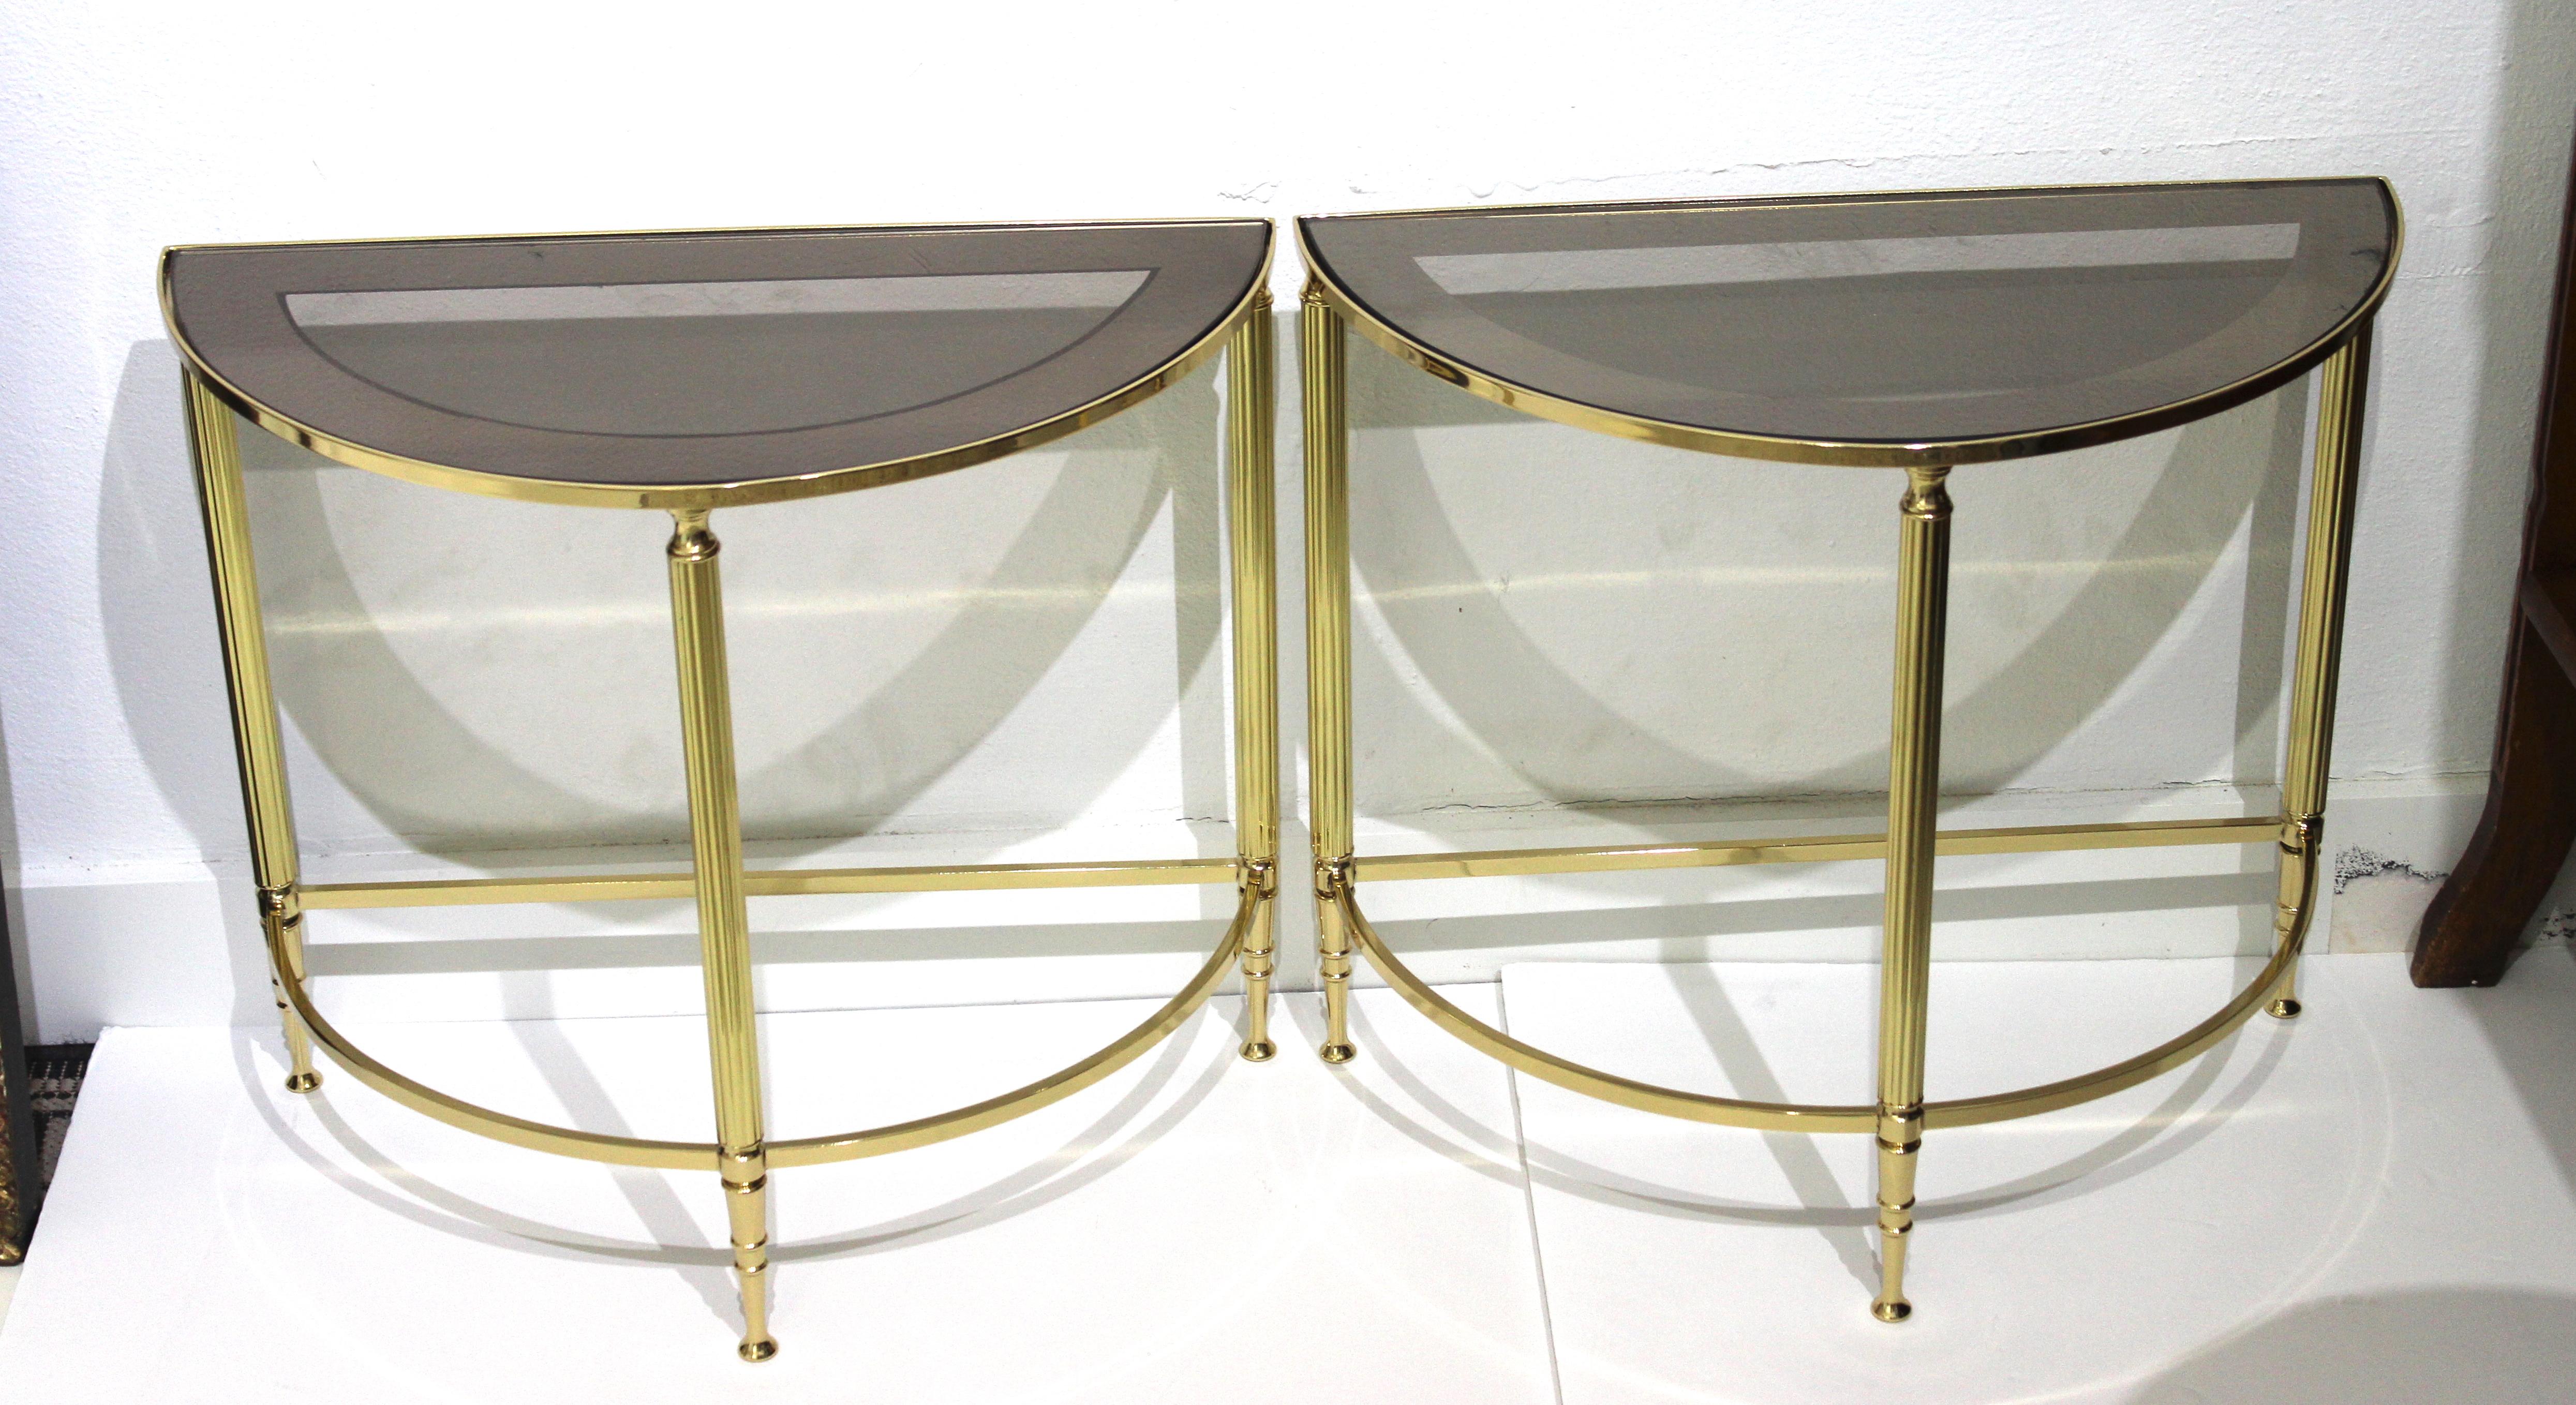 Mid-Century Modern demi-lune demilune drinks or side tables brass and smoked glass - a pair - from a Palm Beach estate.